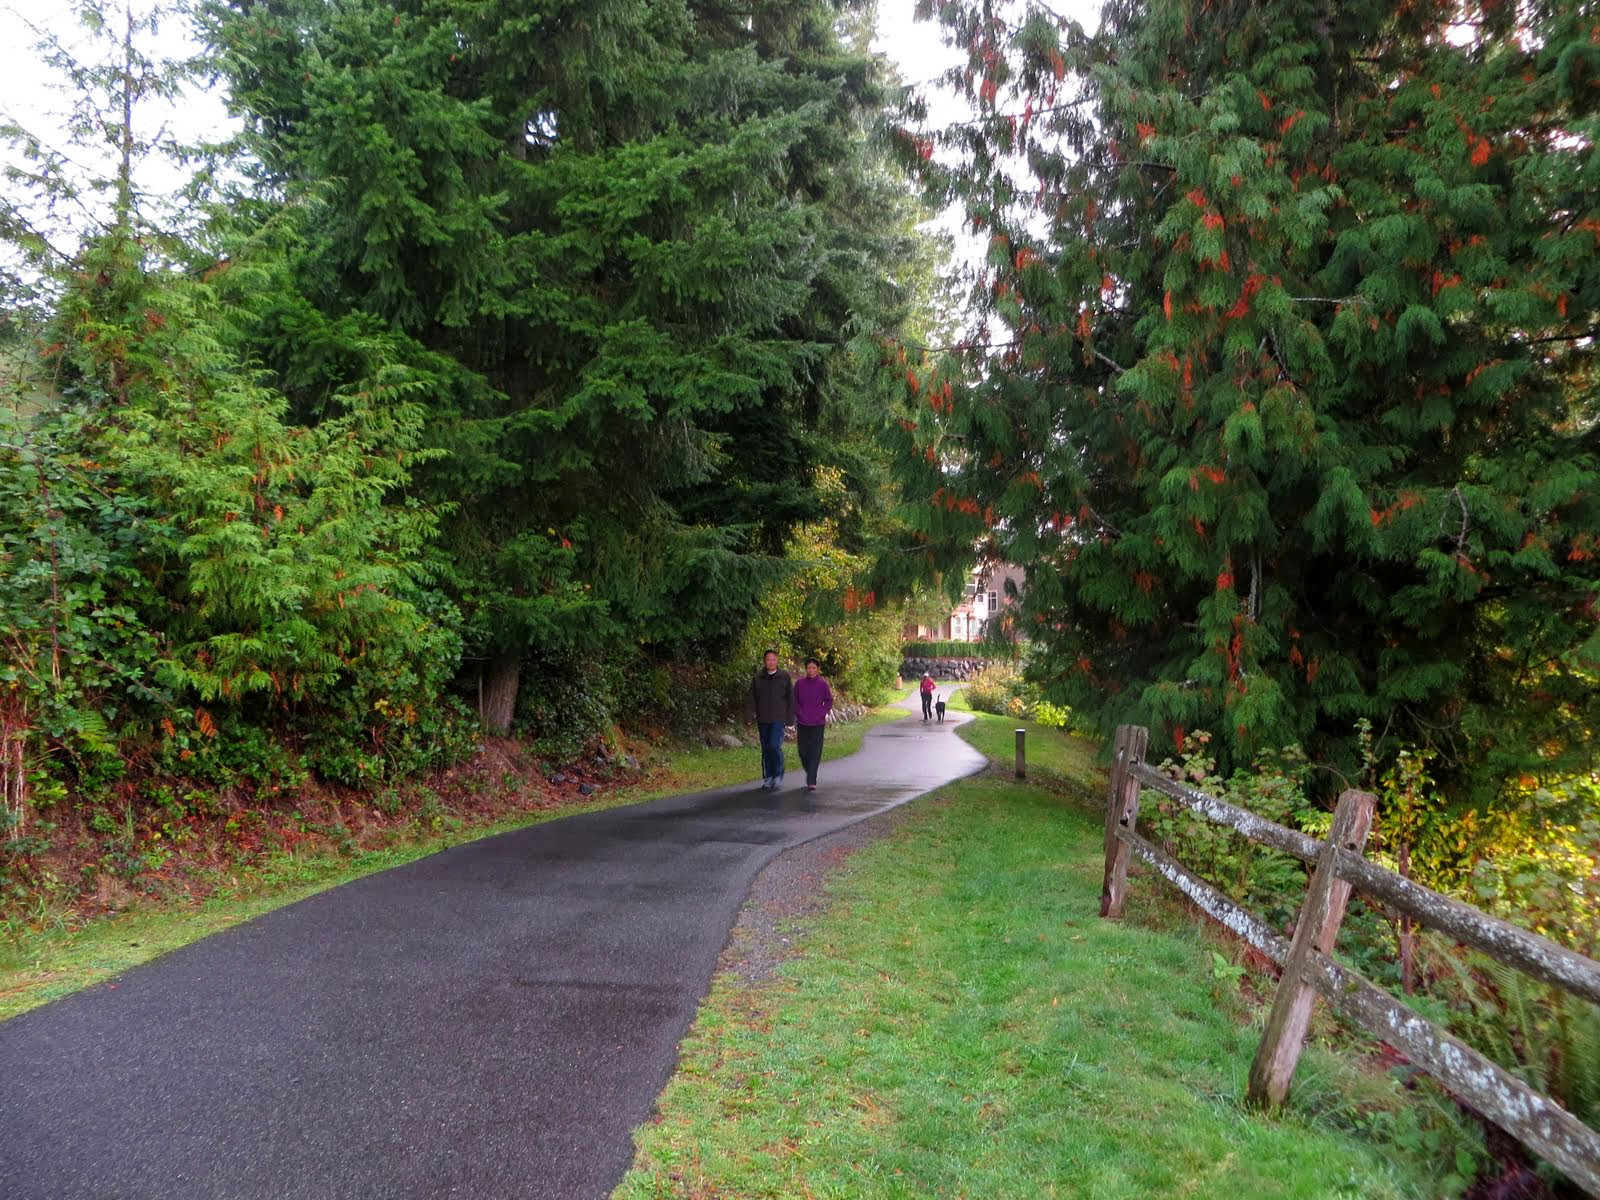 A pair of people wearing jackets stroll along paved tree-lined path at Illahee Park, another walker with dog a ways behind.